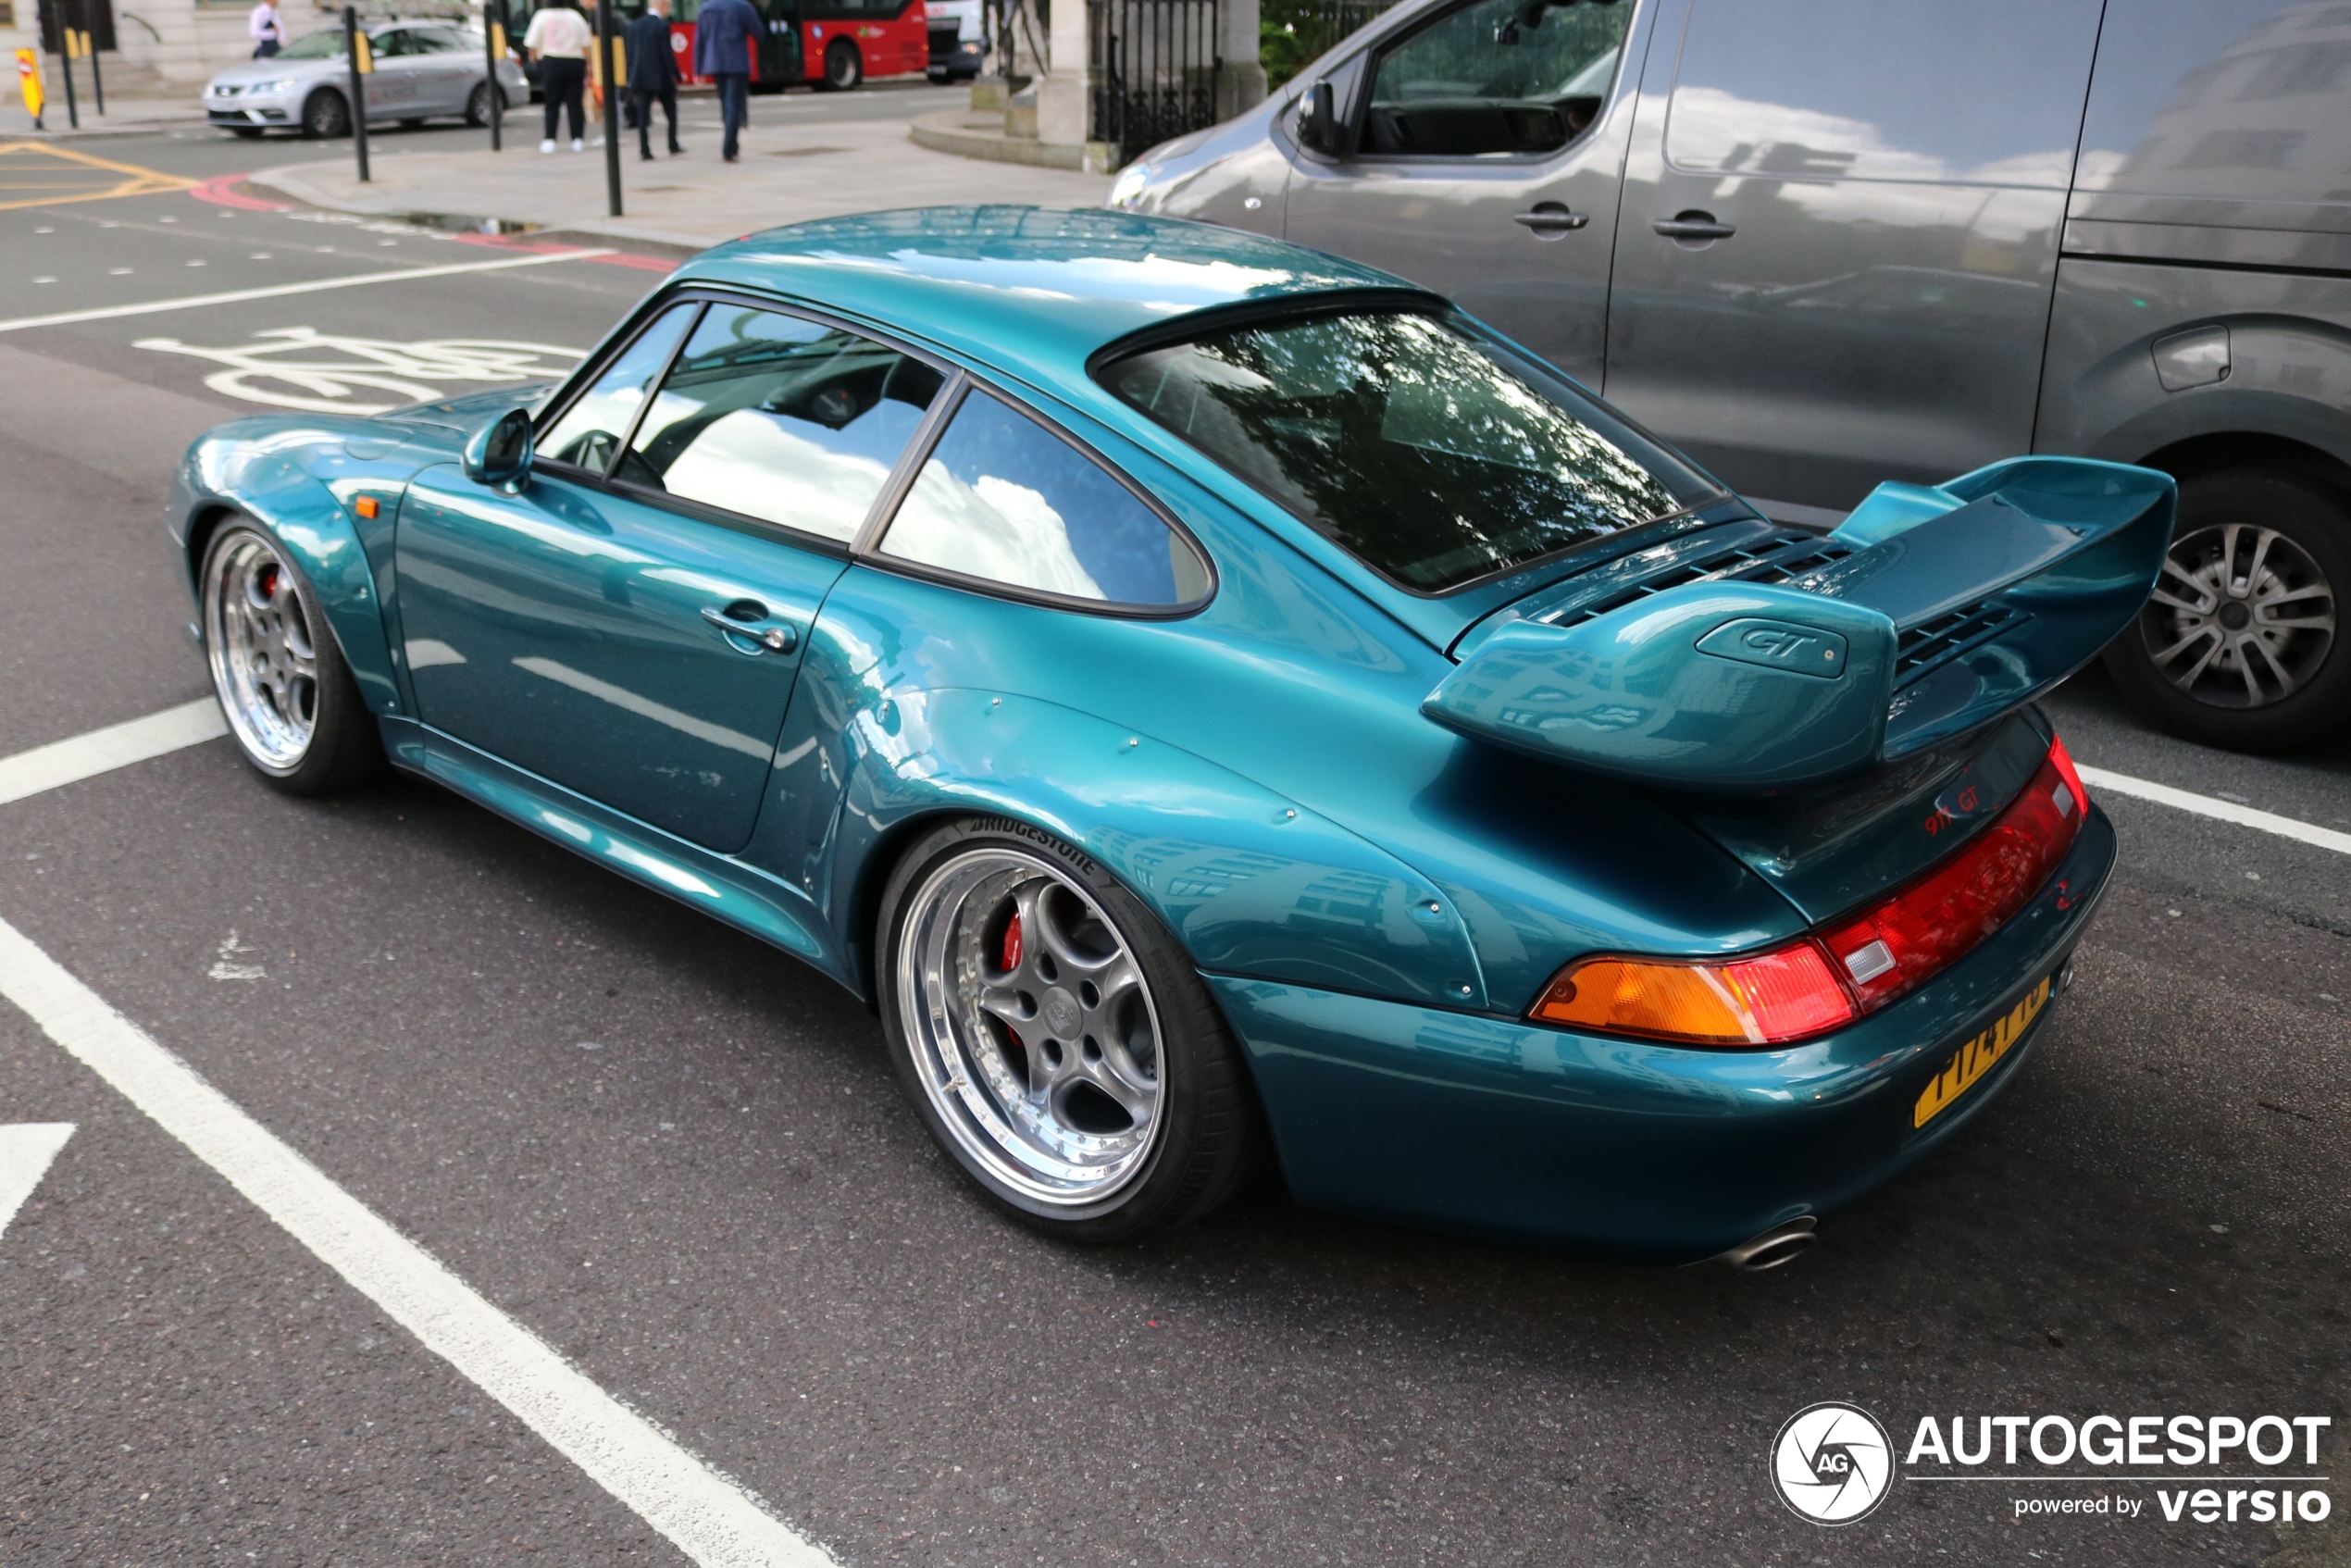 A extraordinarily pretty 993 GT2 shows up in London